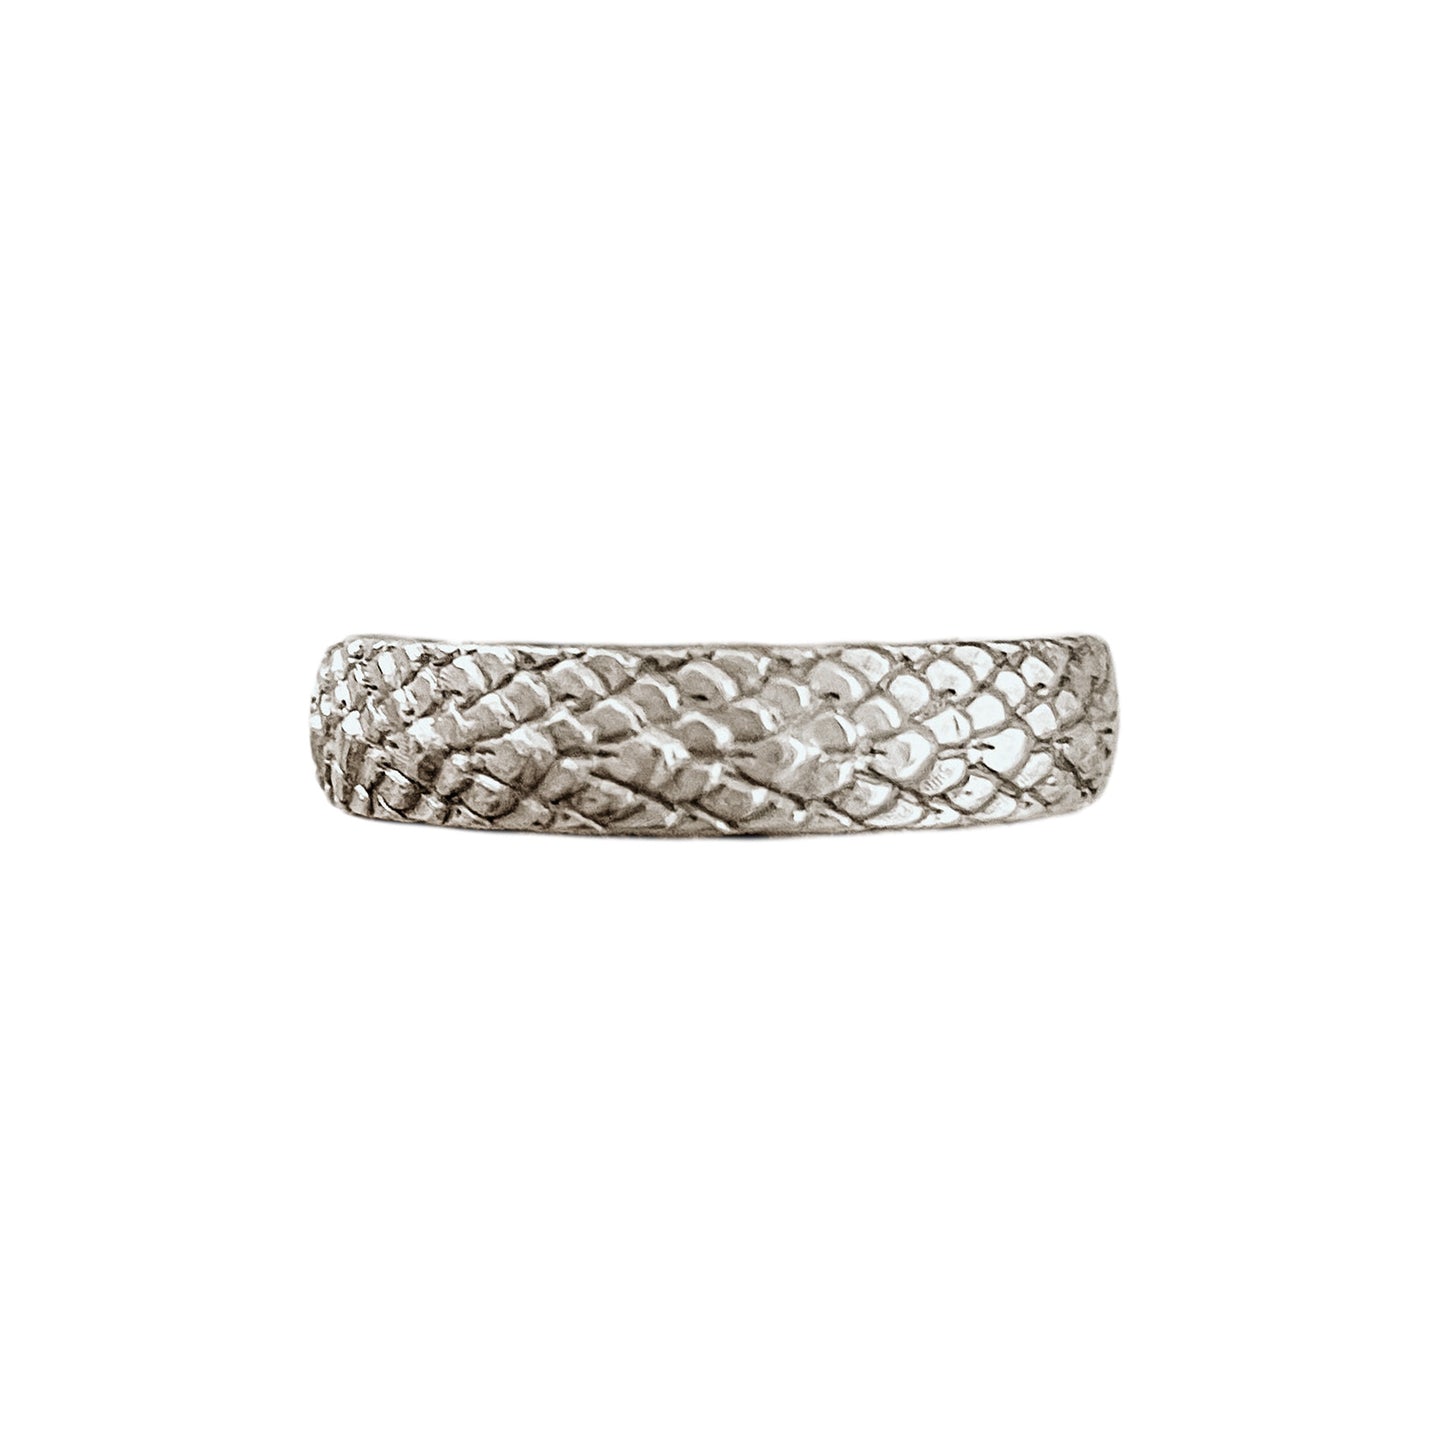 Snakeskin Sterling Silver Stacking Ring shown in bright finish.